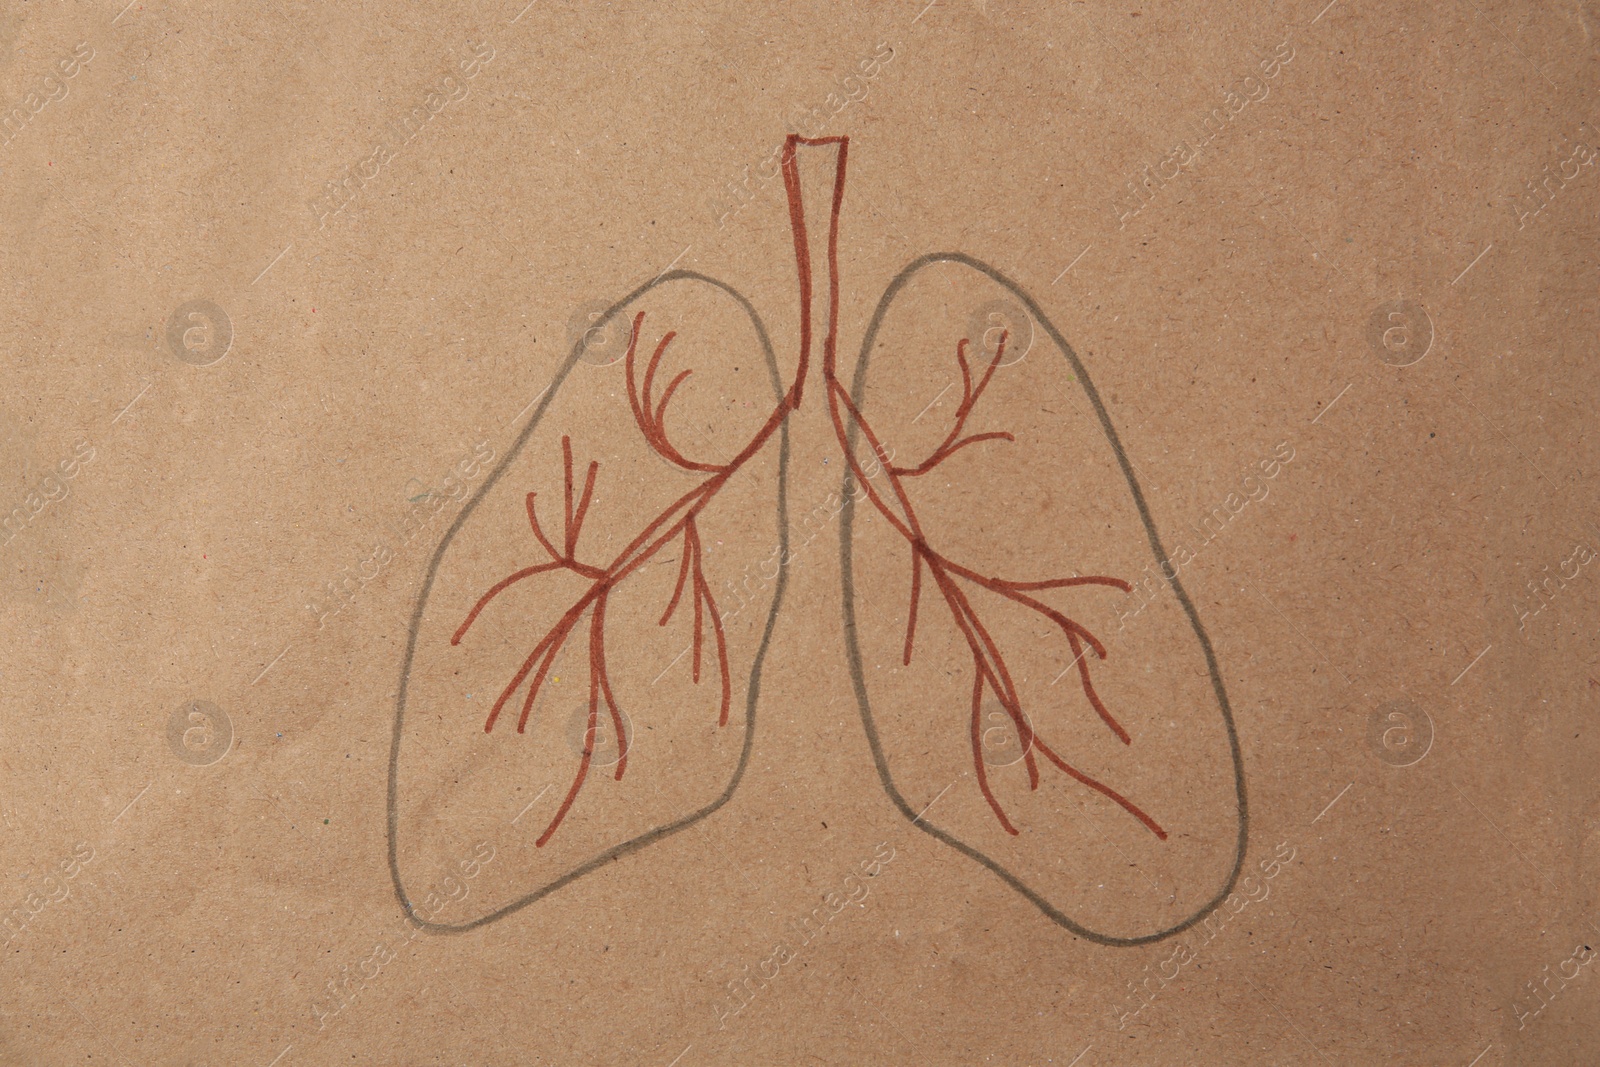 Photo of Human lungs drawn on kraft paper, top view